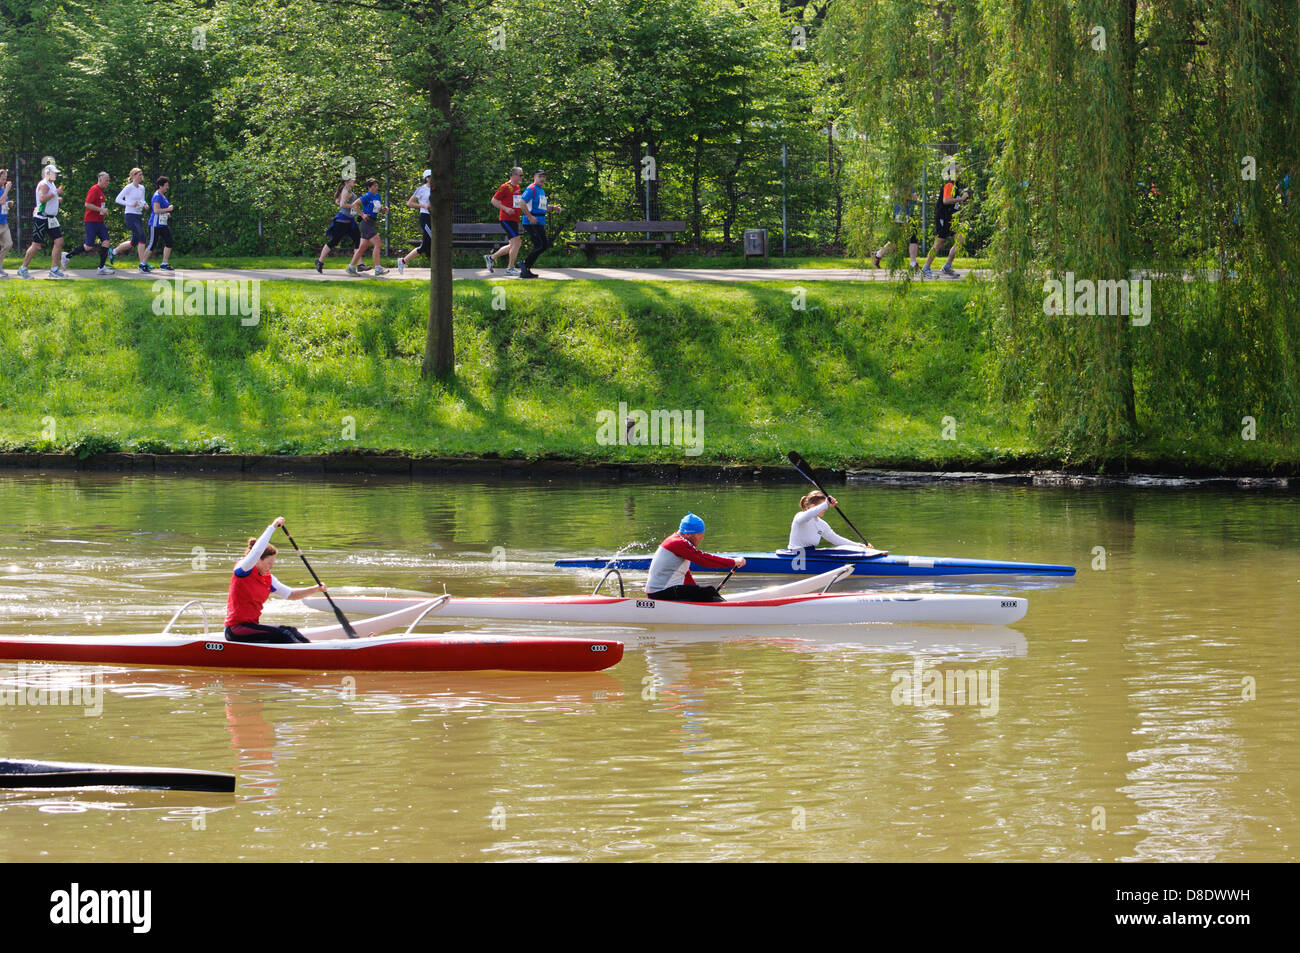 Male and female paddlers and canoeists rowing on the River Neckar, marathon runners in the background – Heilbronn Germany Stock Photo